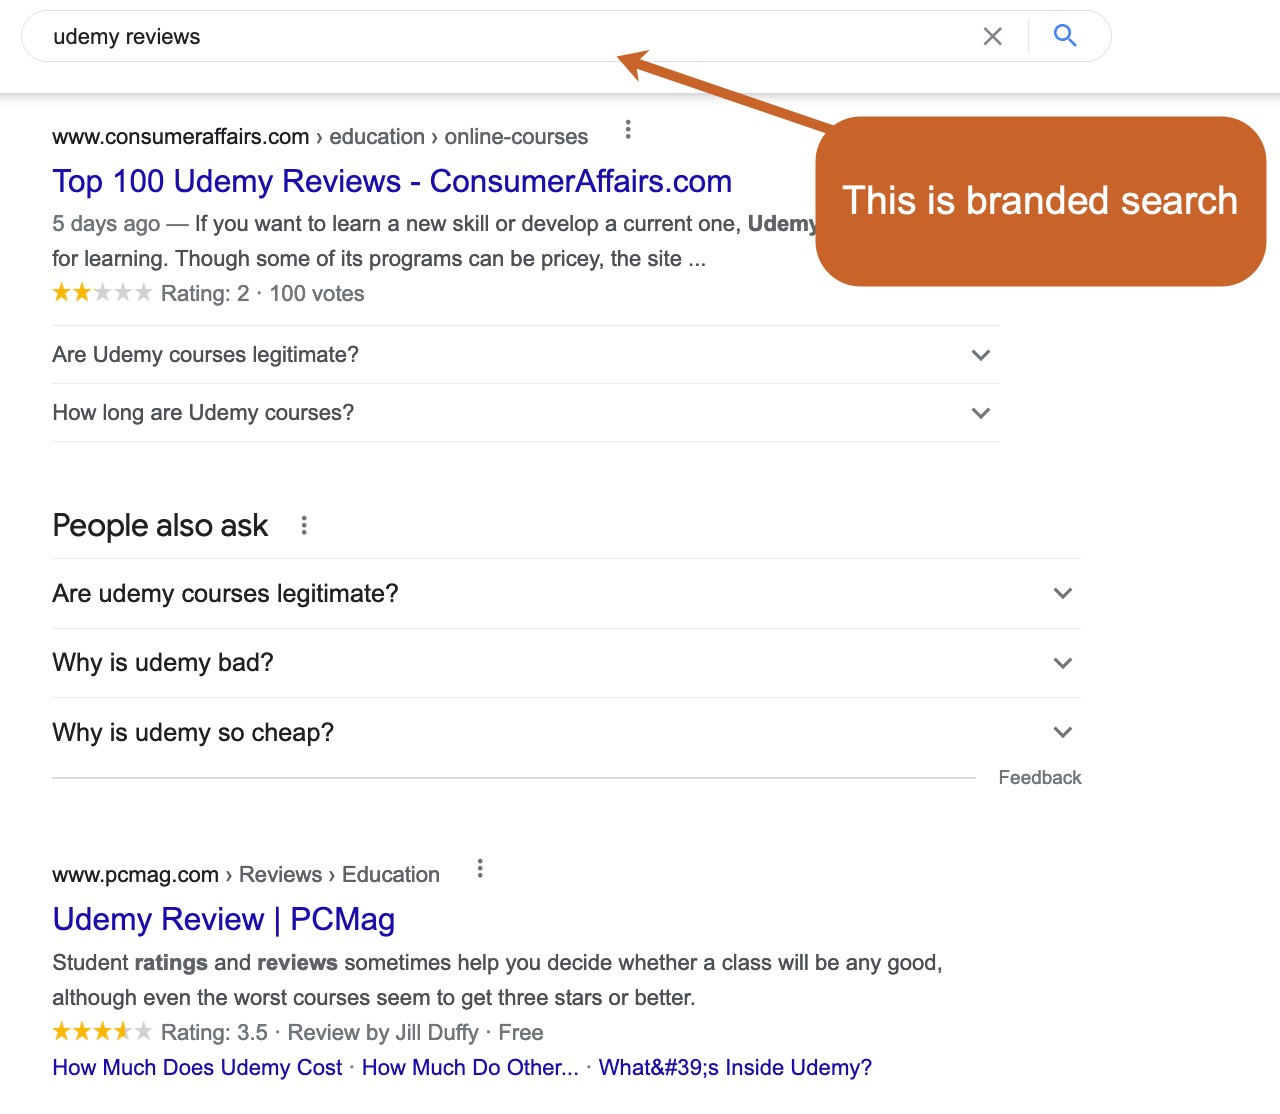 Optimize for Branded Search to Create a More Effective Sales Funnel